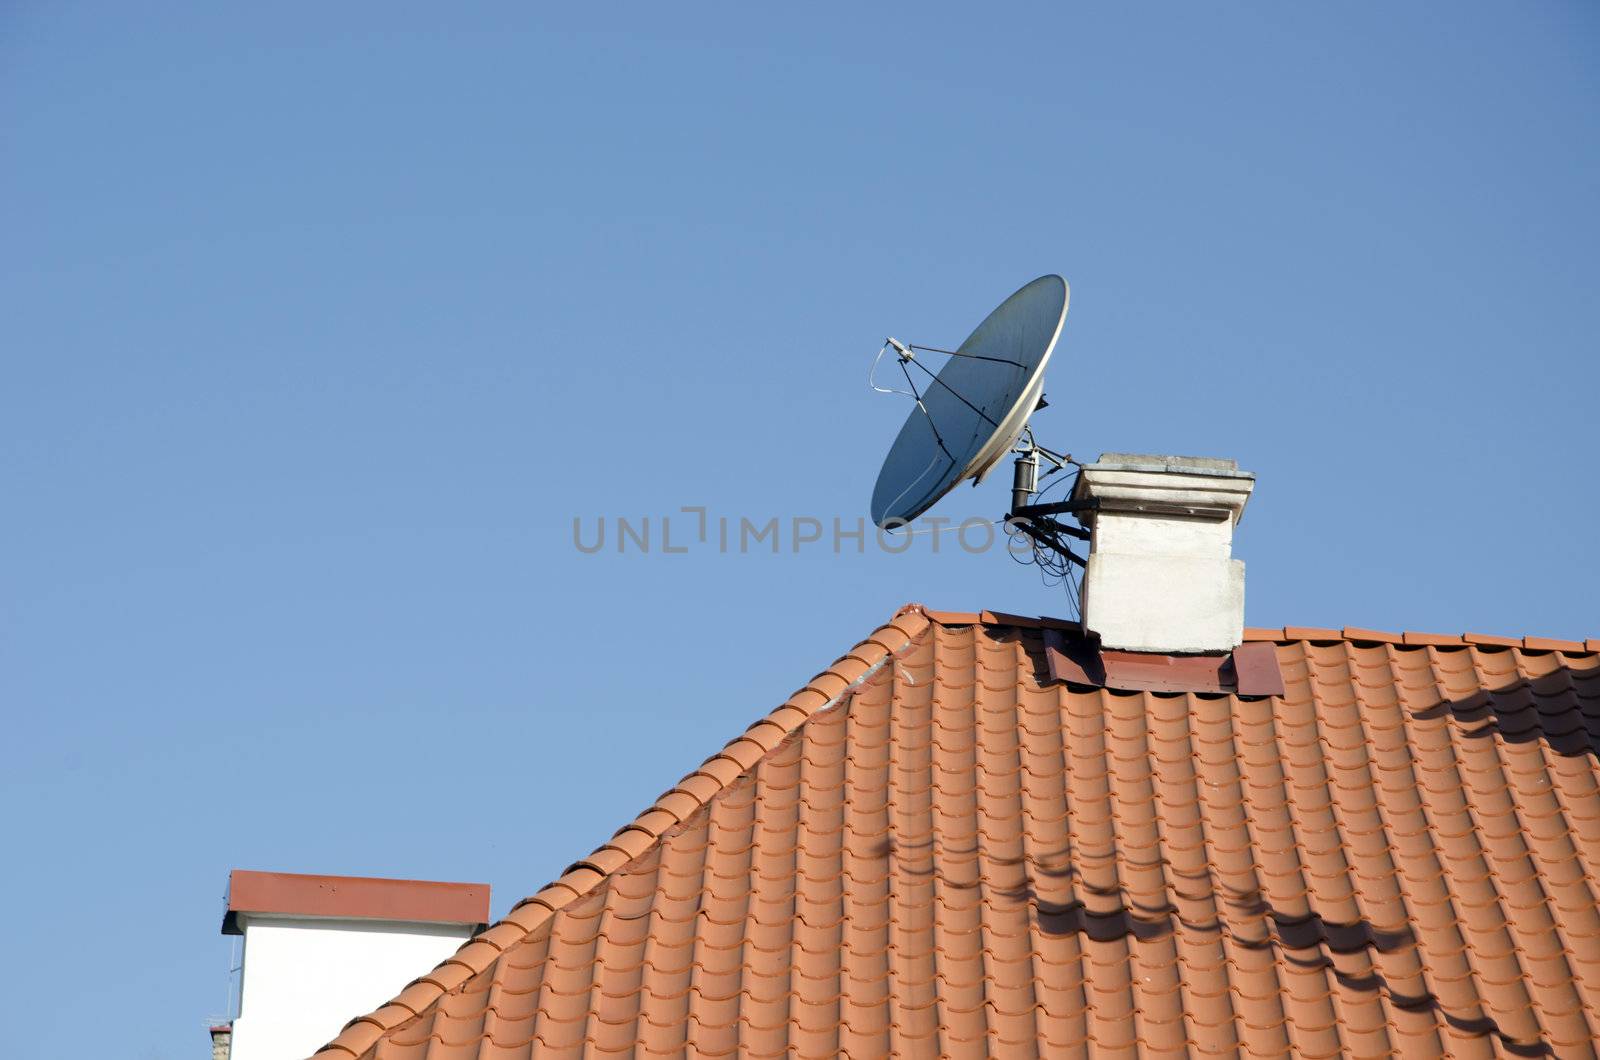 Satellite television antenna attached to chimney on red tiled roof house on background of blue sky.